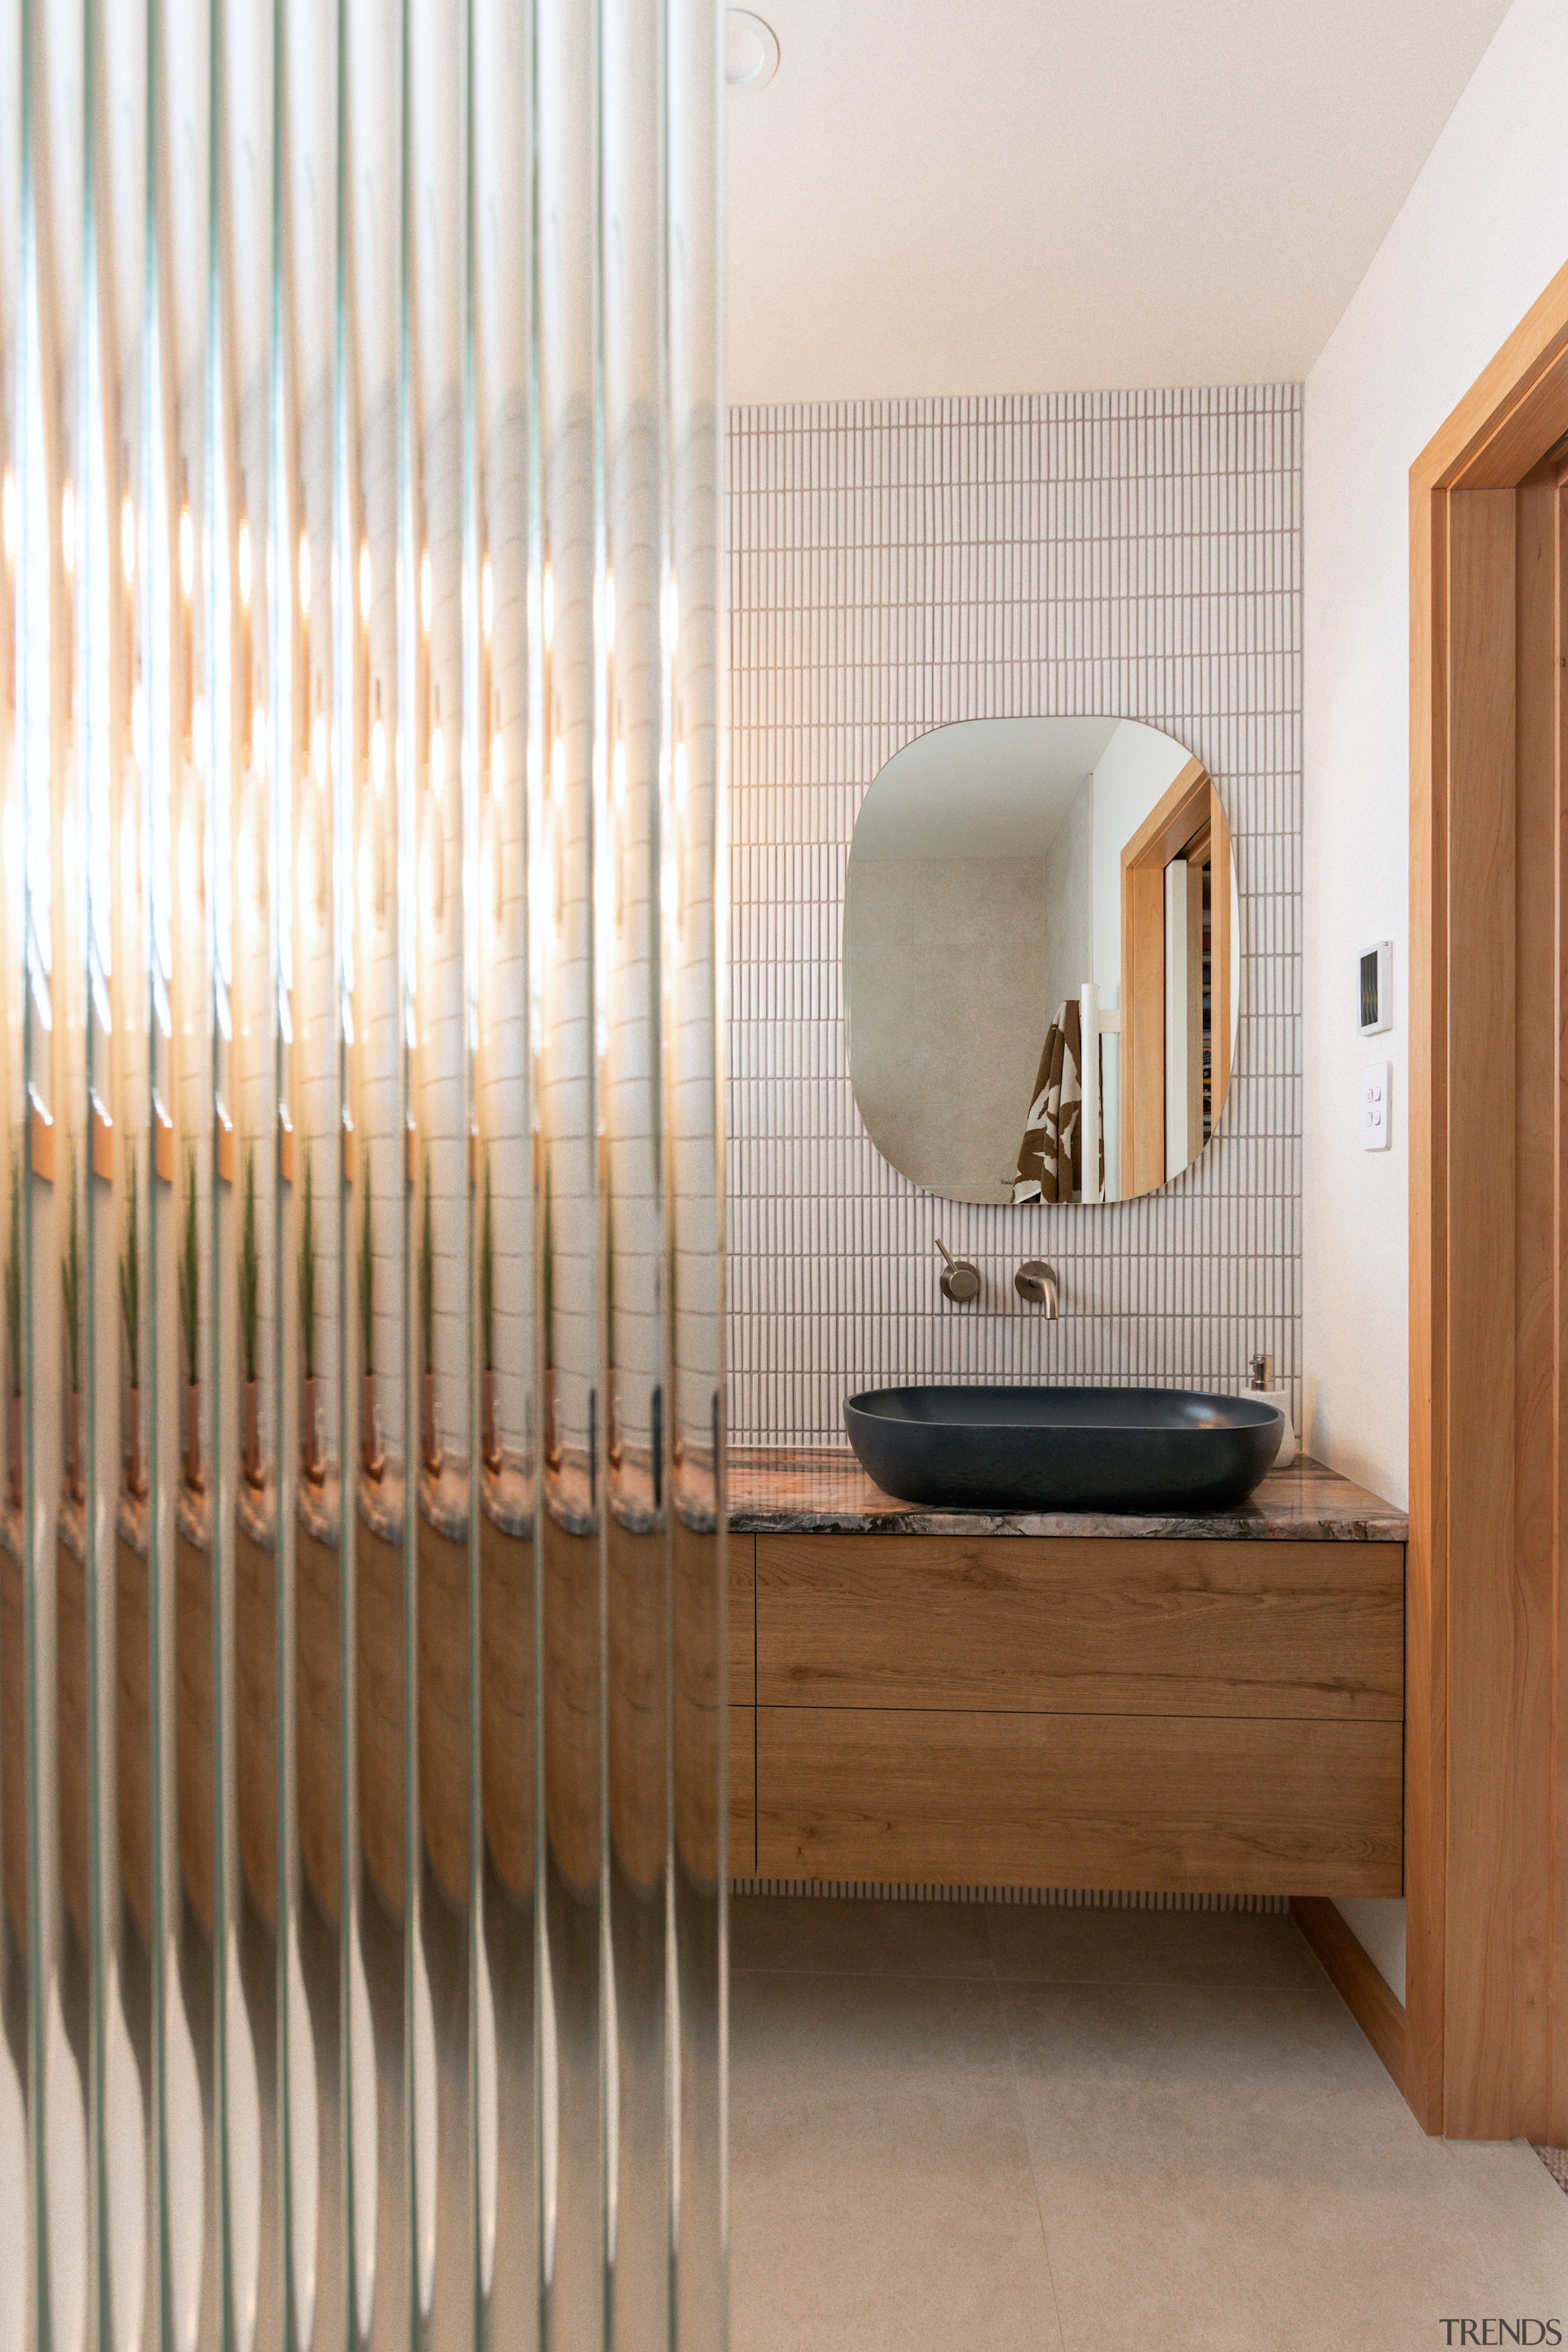 The reeded glass shower screen was used to 